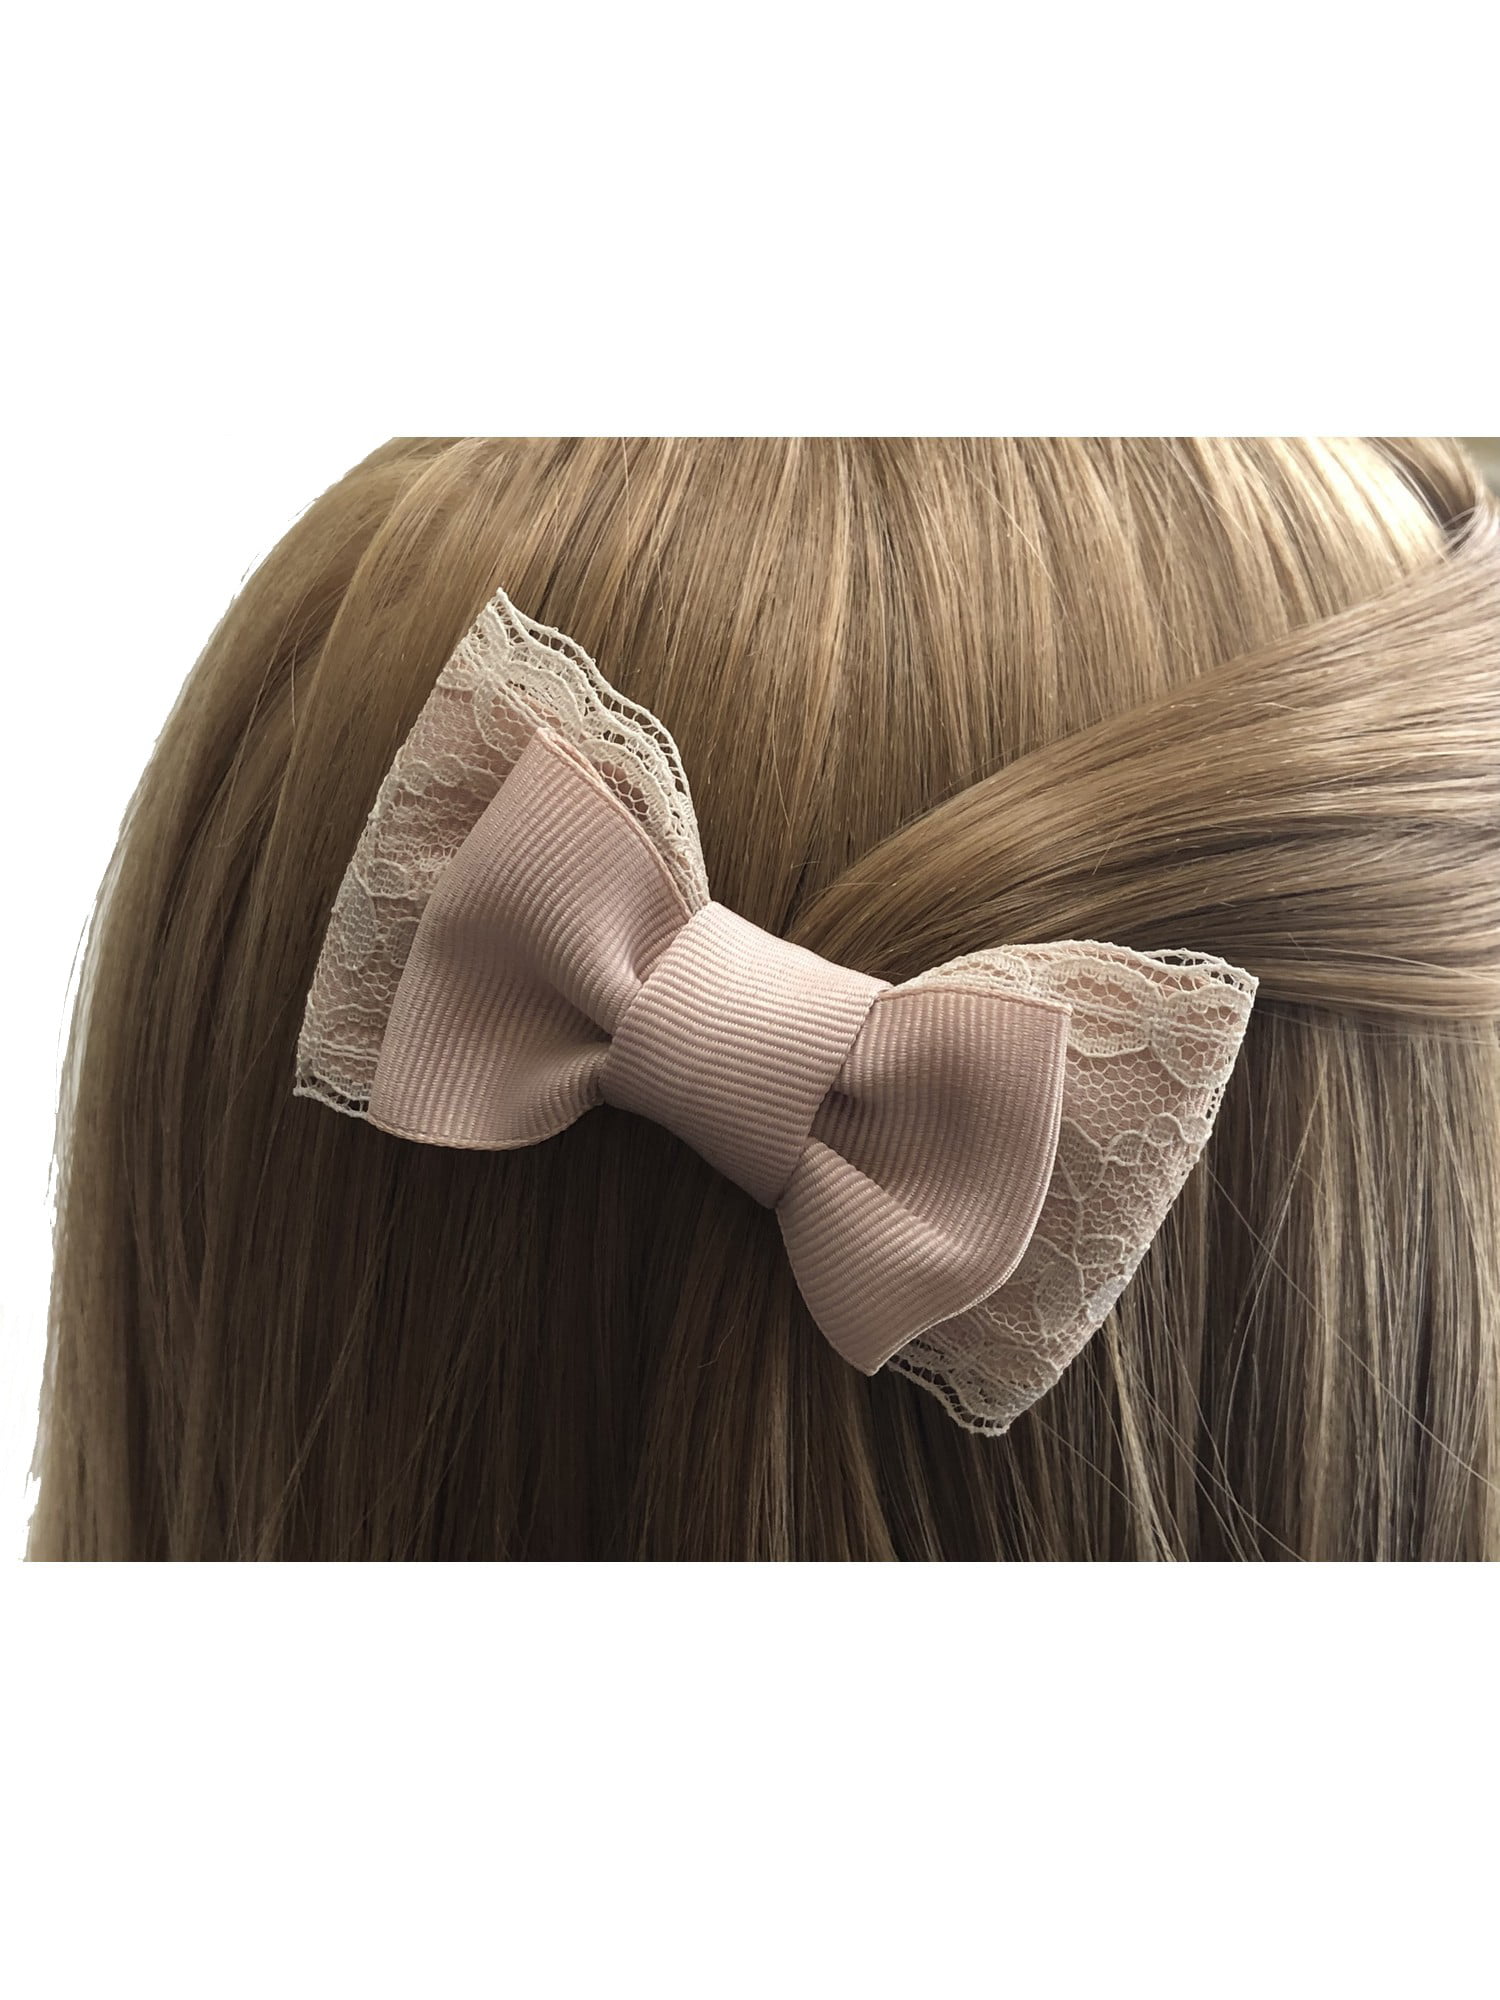 10 PCS GIRL BOW HAIRPIN BOWKNOT FLOWER MULTI-STYLE HAIR CLIP XMAS GIFT ALLURING 